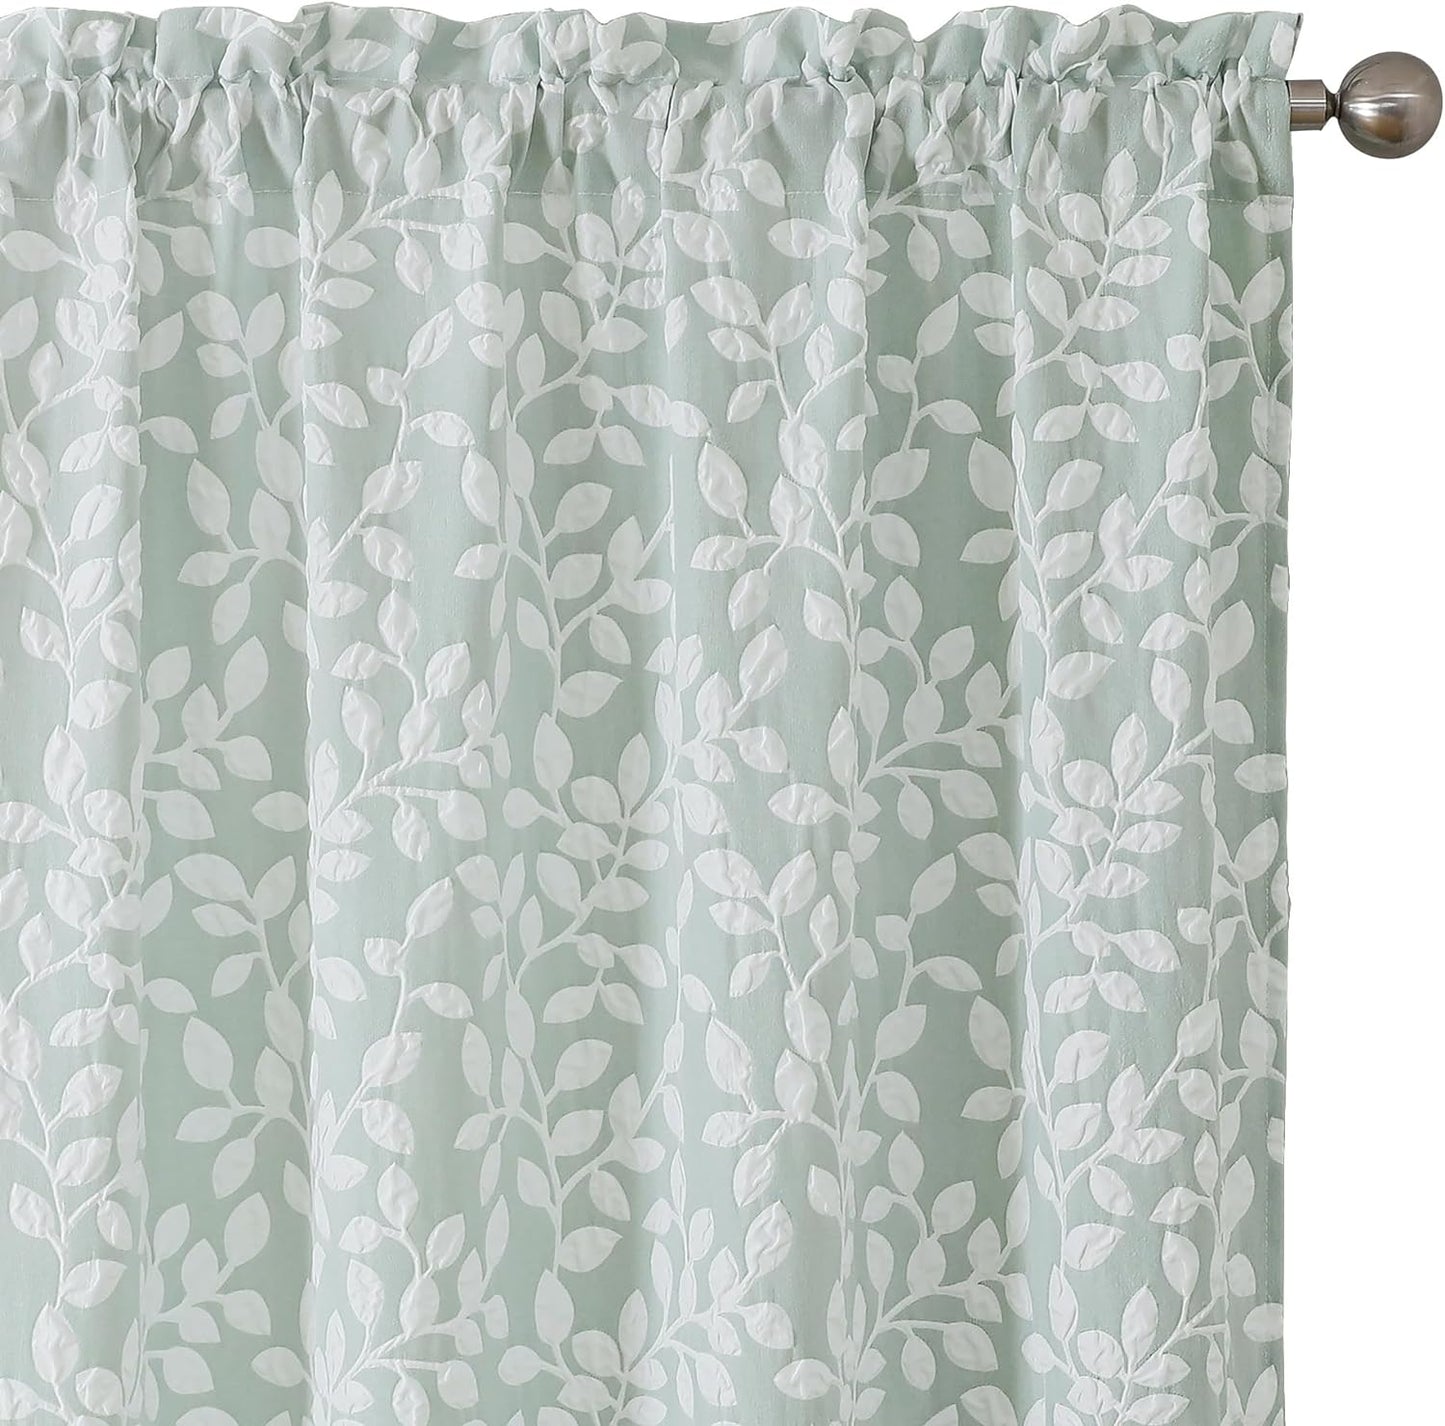 Chyhomenyc Anna White Taupe Curtains 63 Inch Length 2 Panels, Light Filtering Soft Airy 3D Embossed Textured Leaf Pattern Drapes for Bedroom Living Room Windows, Each 42Wx63L Inches  Chyhomenyc Green White 42 W X 54 L 